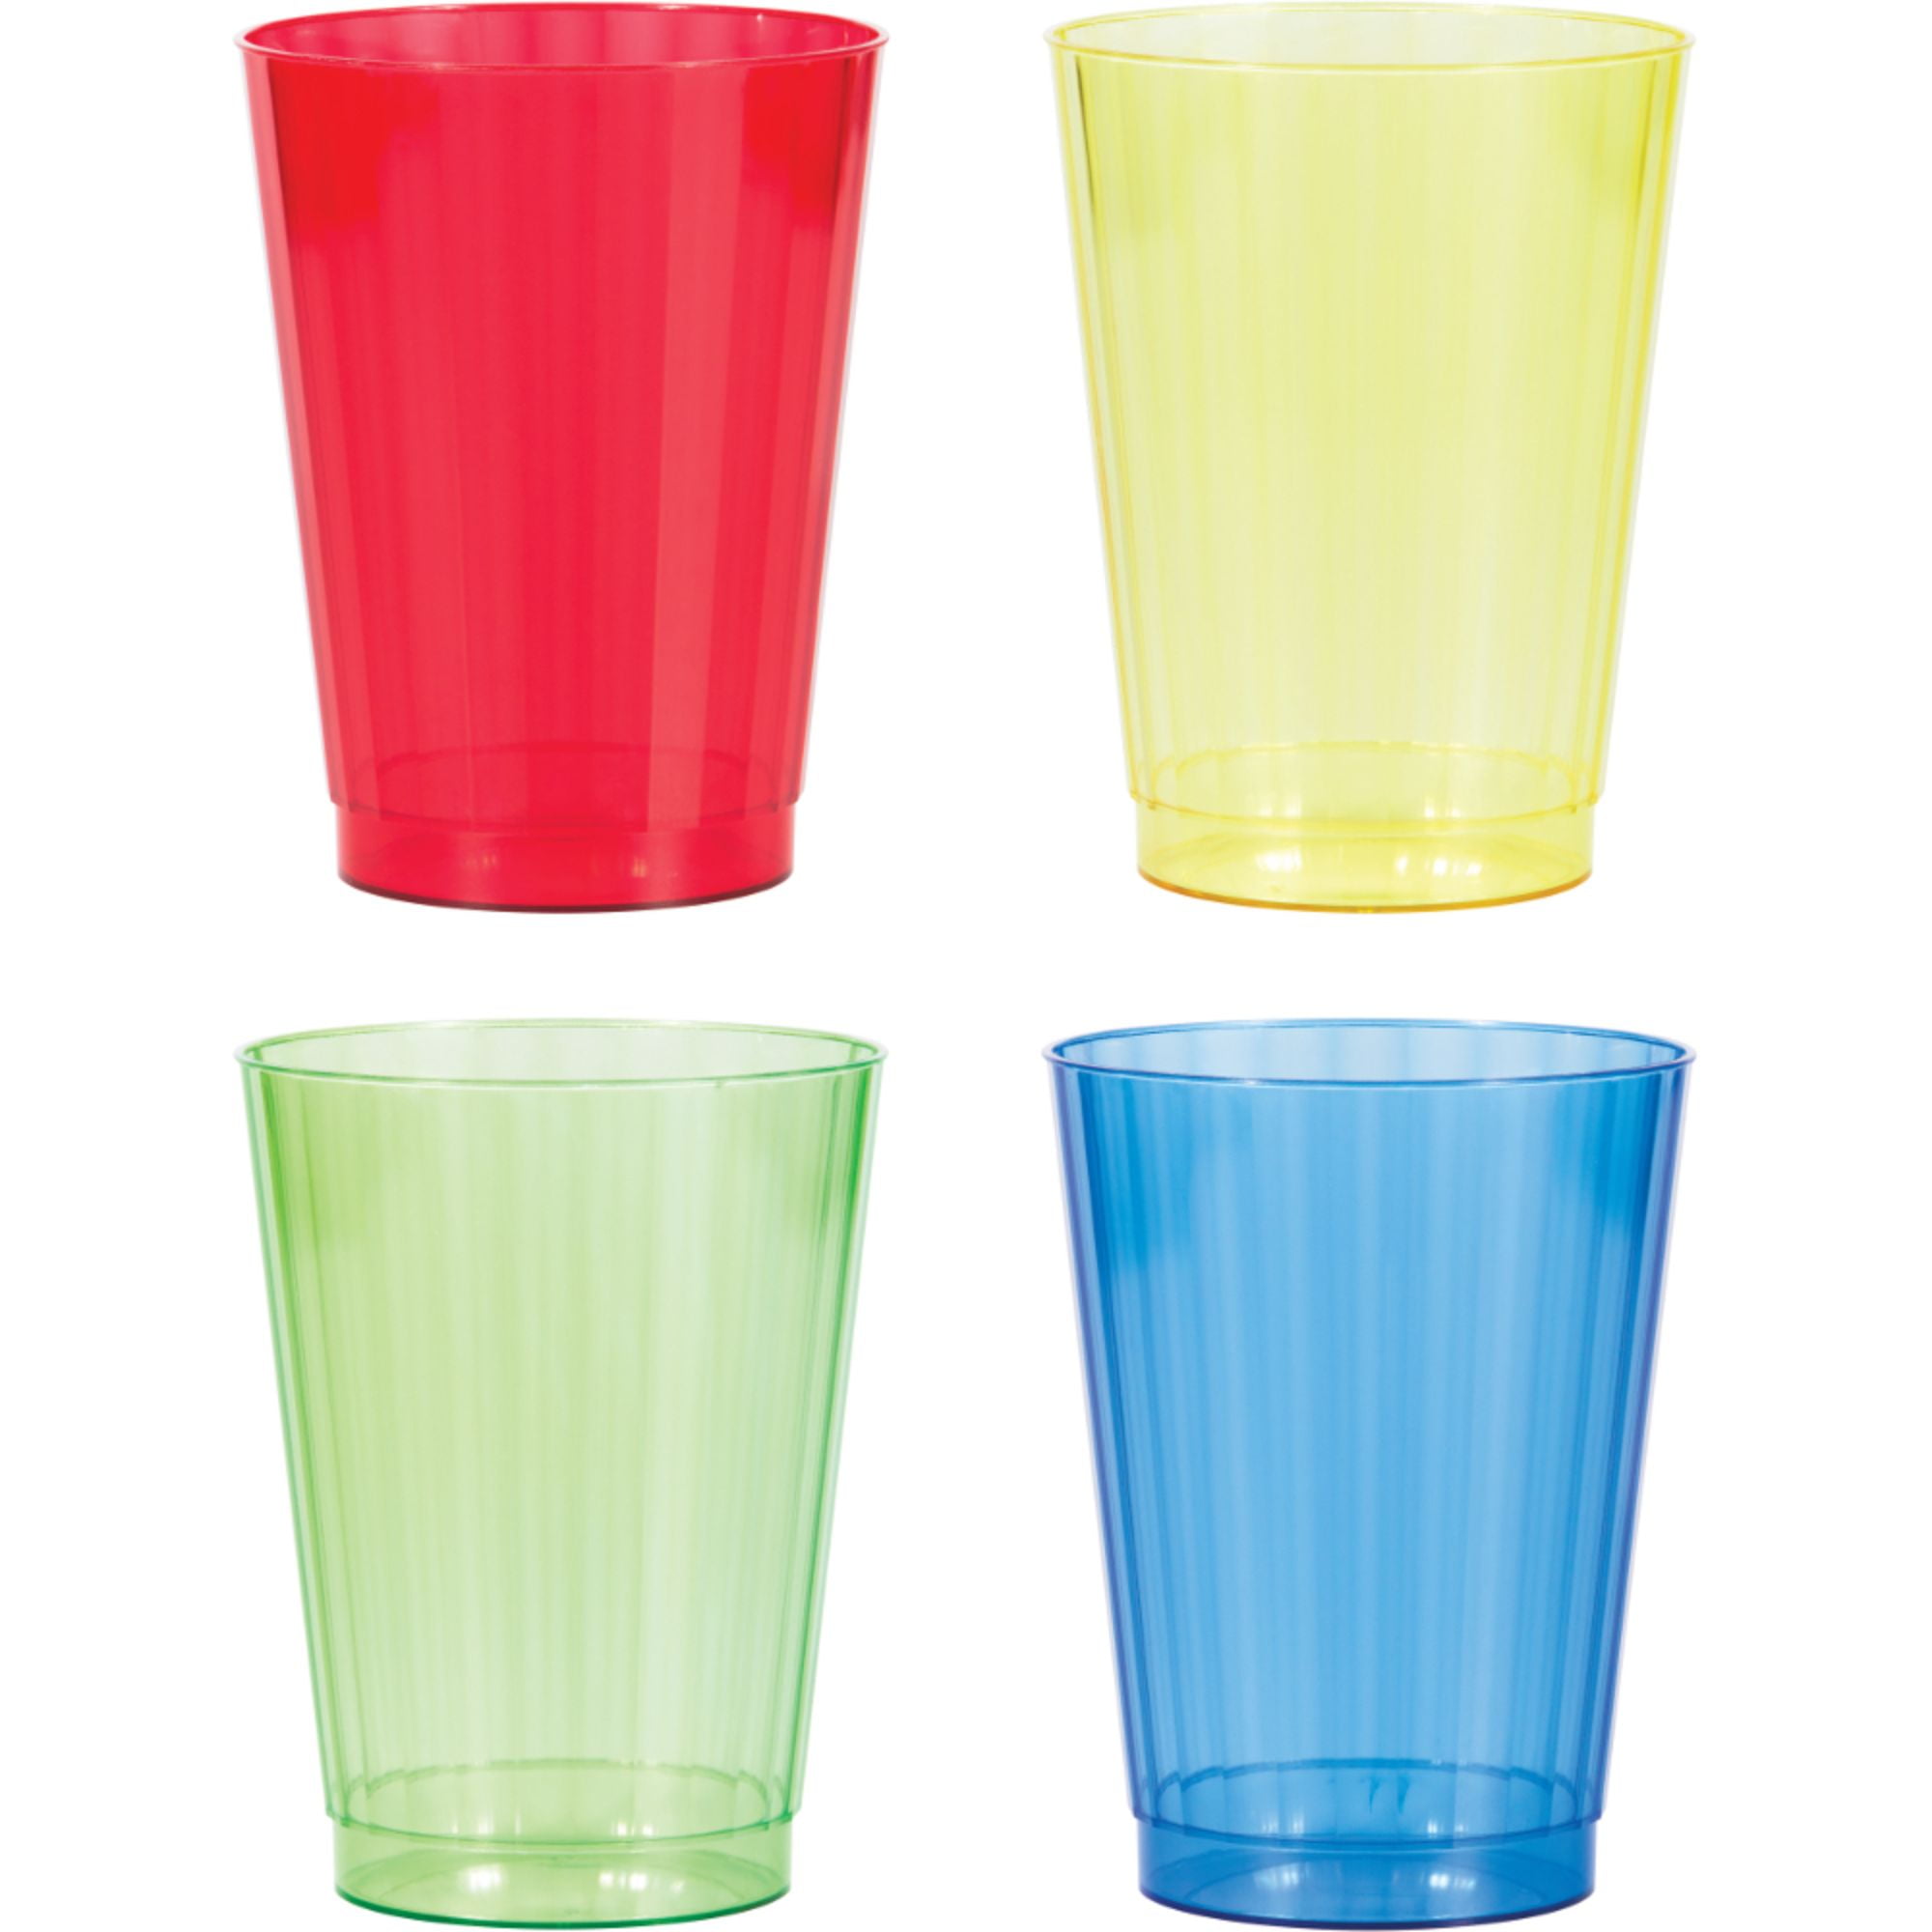 Ice Yard Cups (54 Cups - Lime) - for Margaritas and Frozen Drinks Kids Parties - 17oz. (500ml)